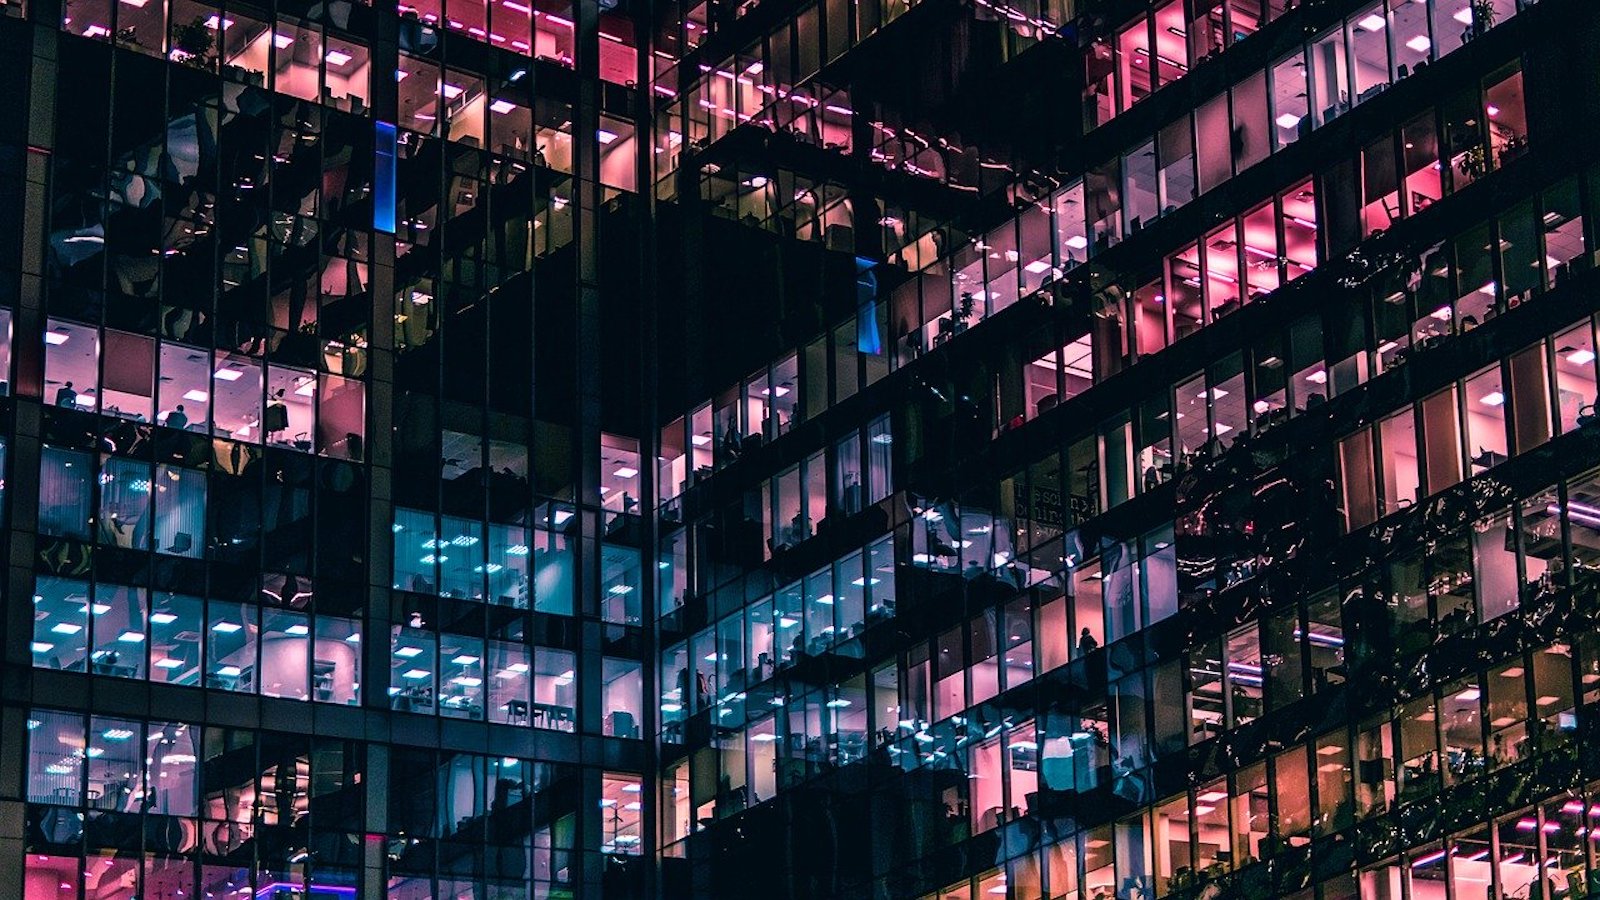 Large office building at night with windows lit up